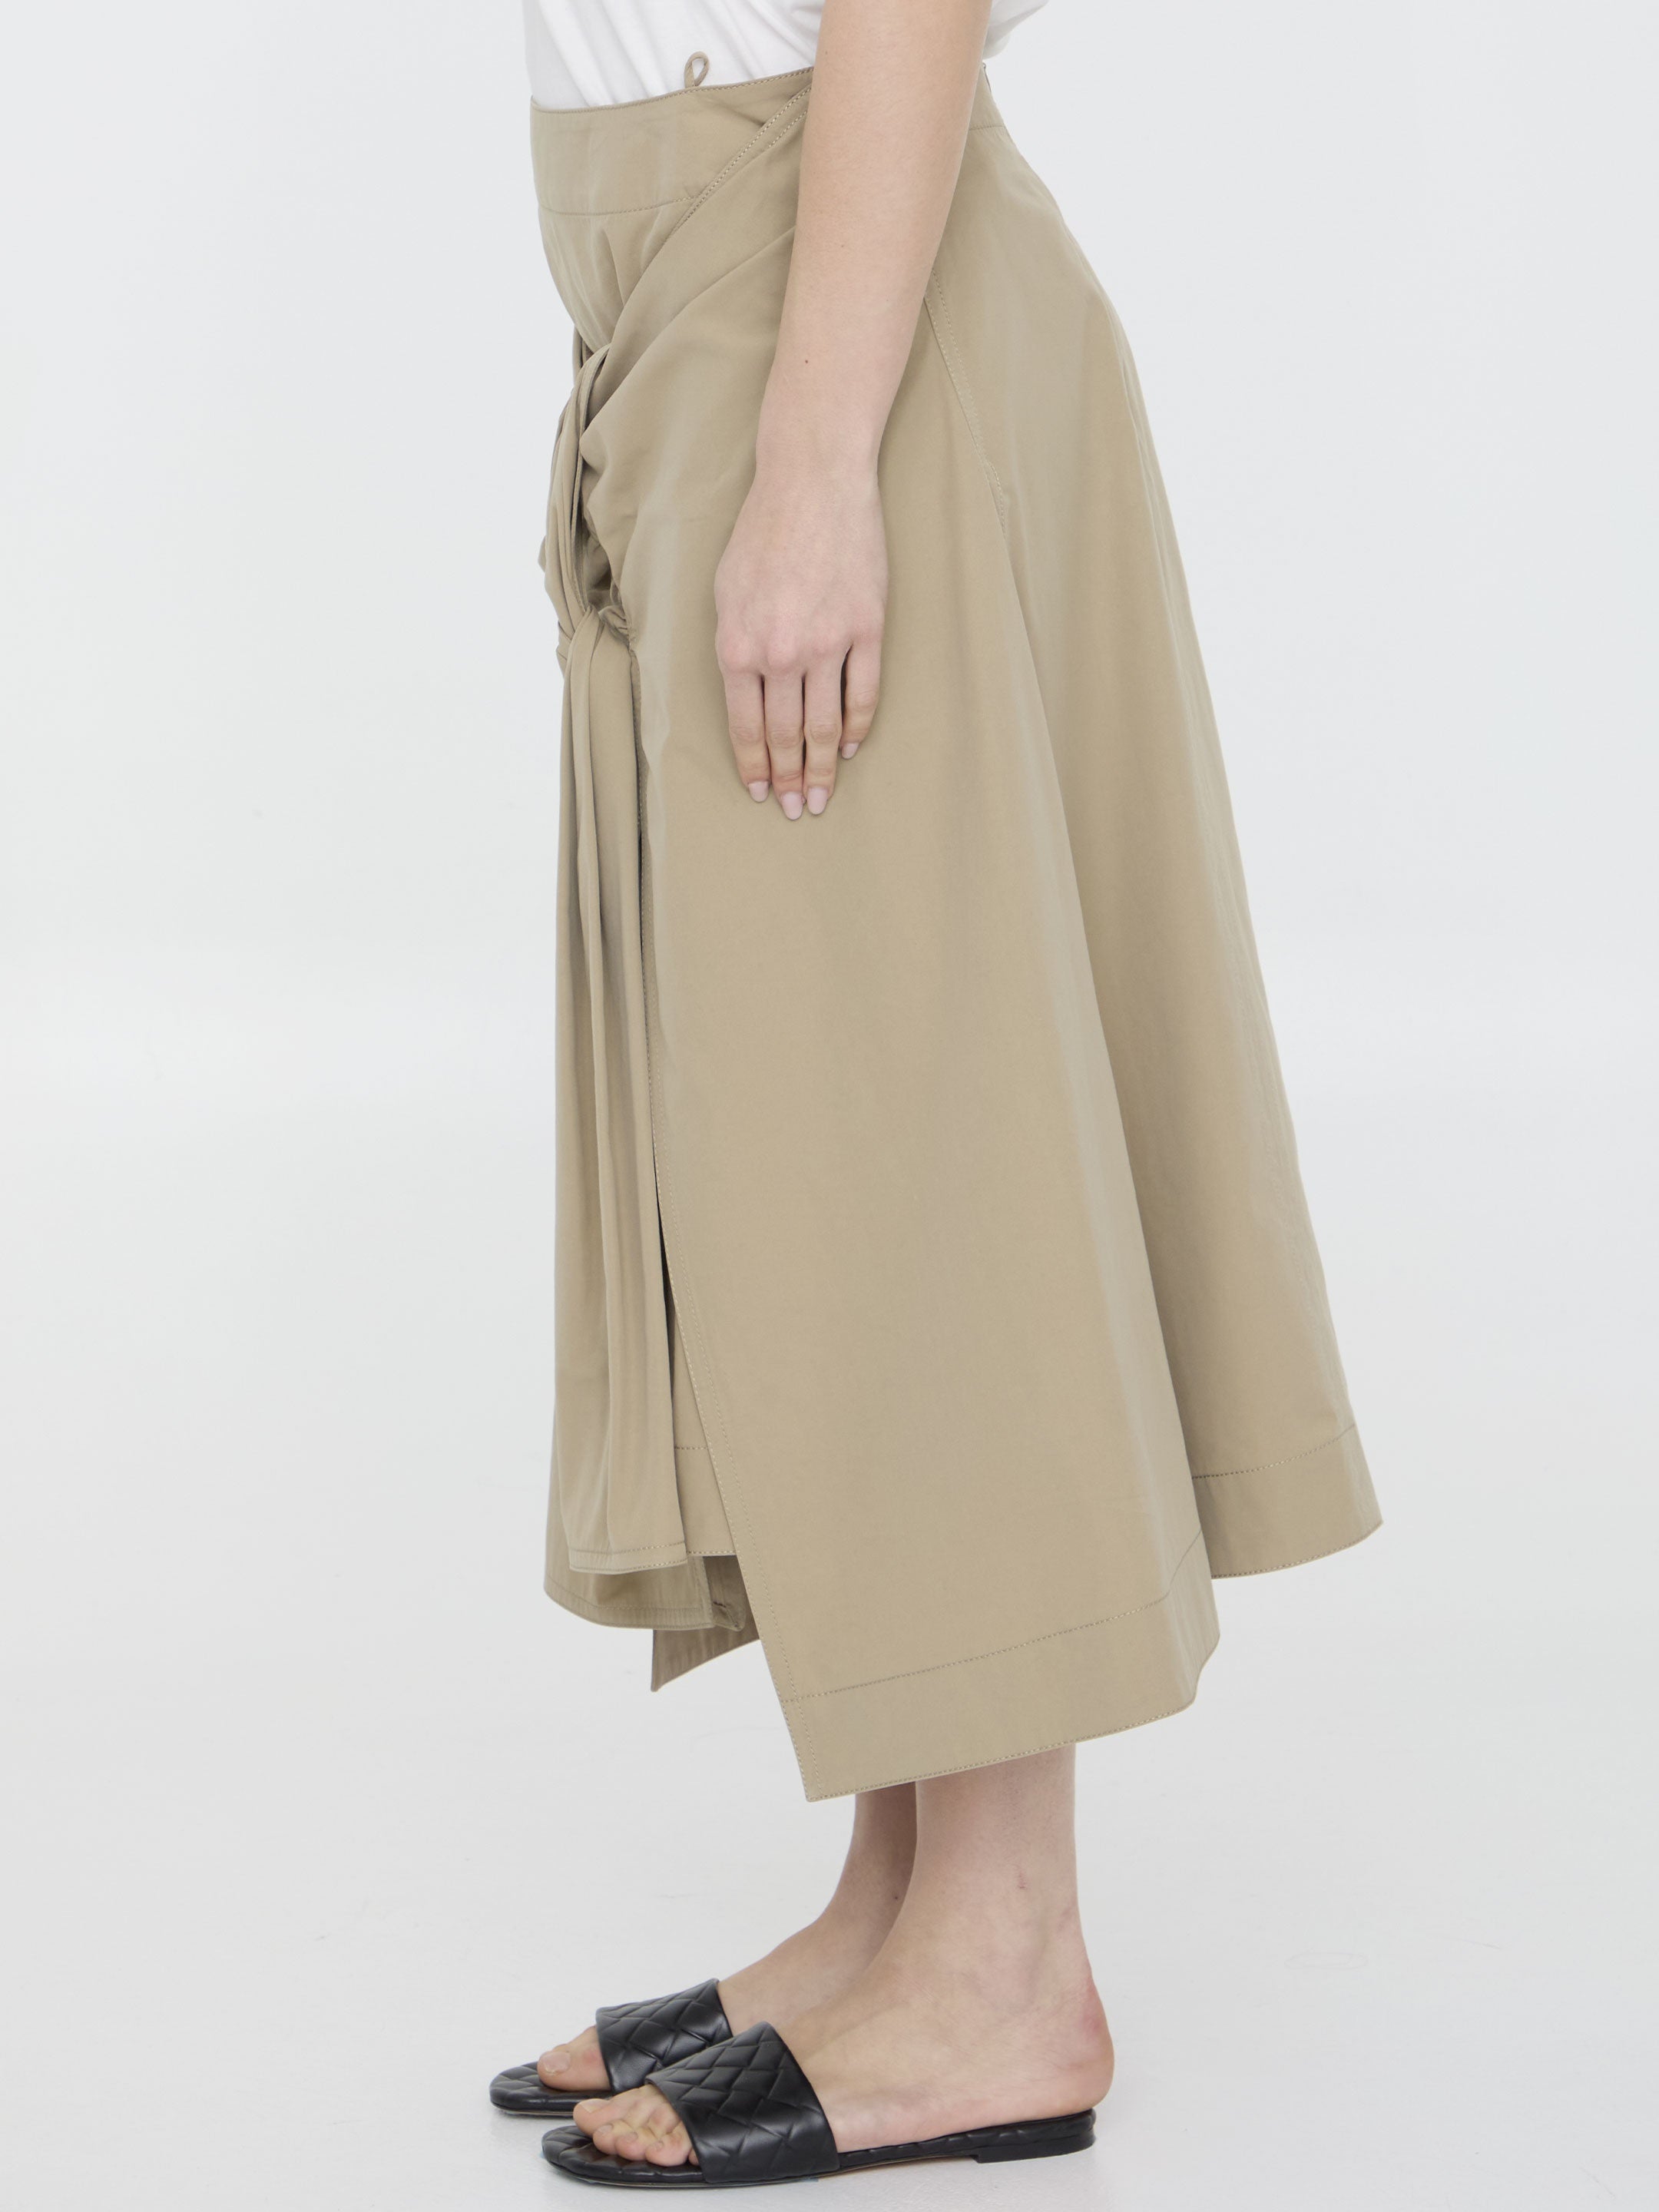 Skirt with draping